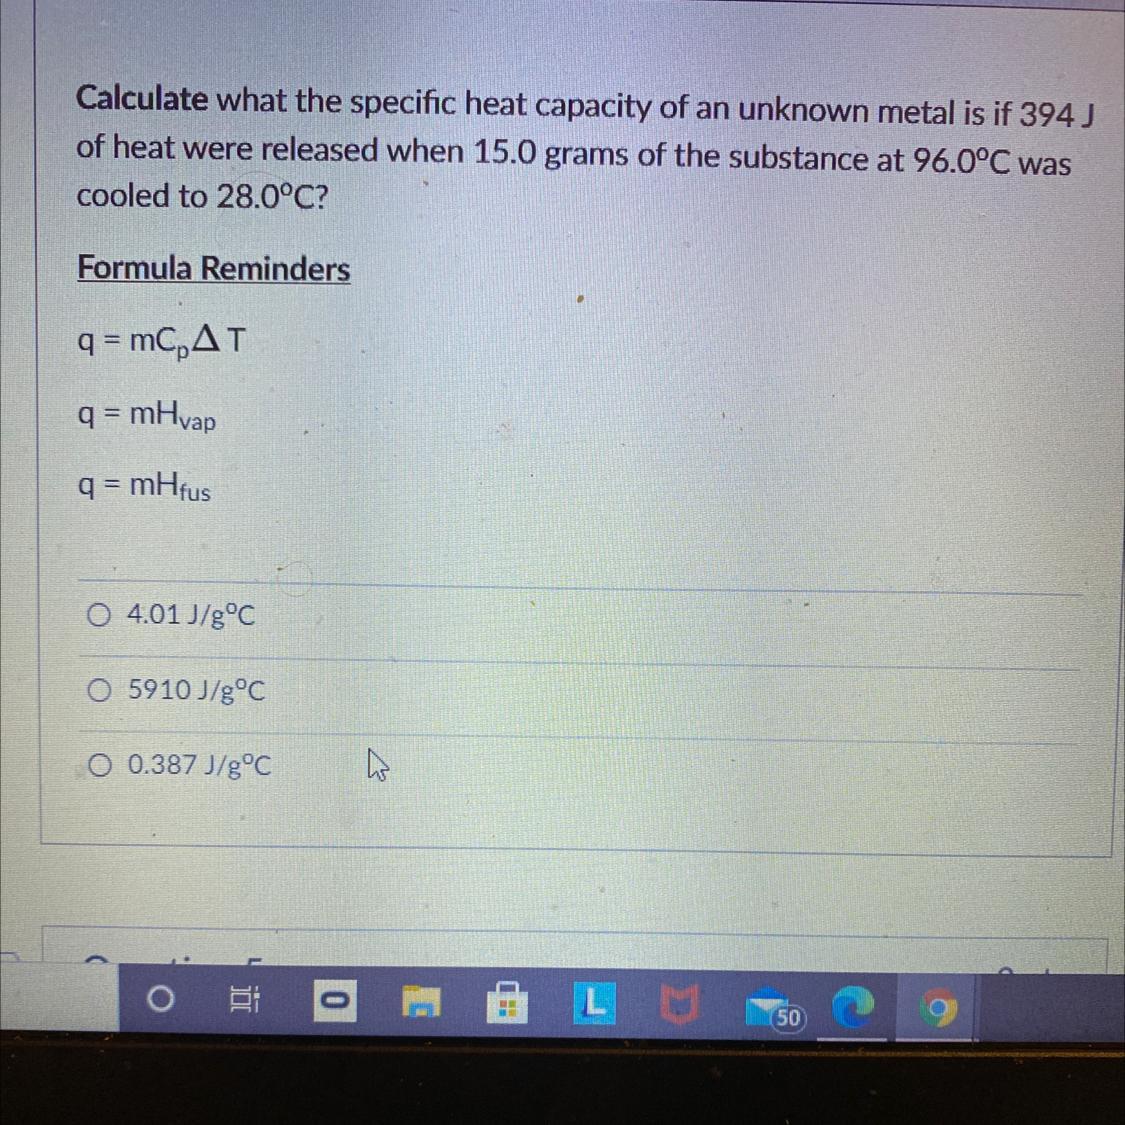 Calculate What The Specific Heat Capacity Of An Unknown Metal Is If 394)of Heat Were Released When 15.0